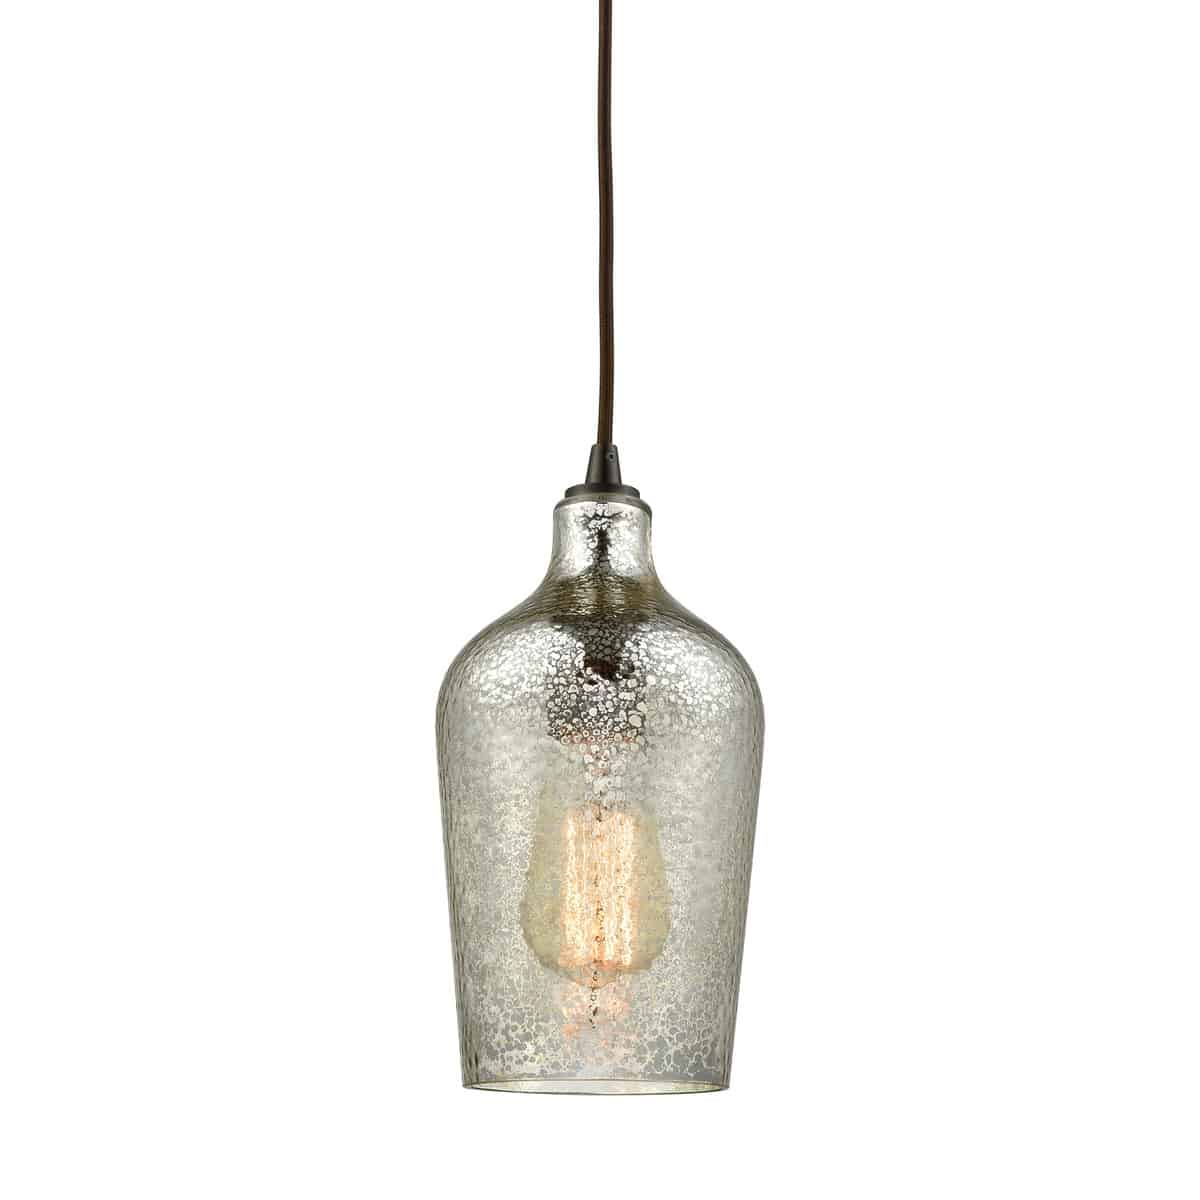 Hammered Glass 1 Light Pendant In Oil Rubbed Bronze With Hammered Mercury Glass By Elk Lighting